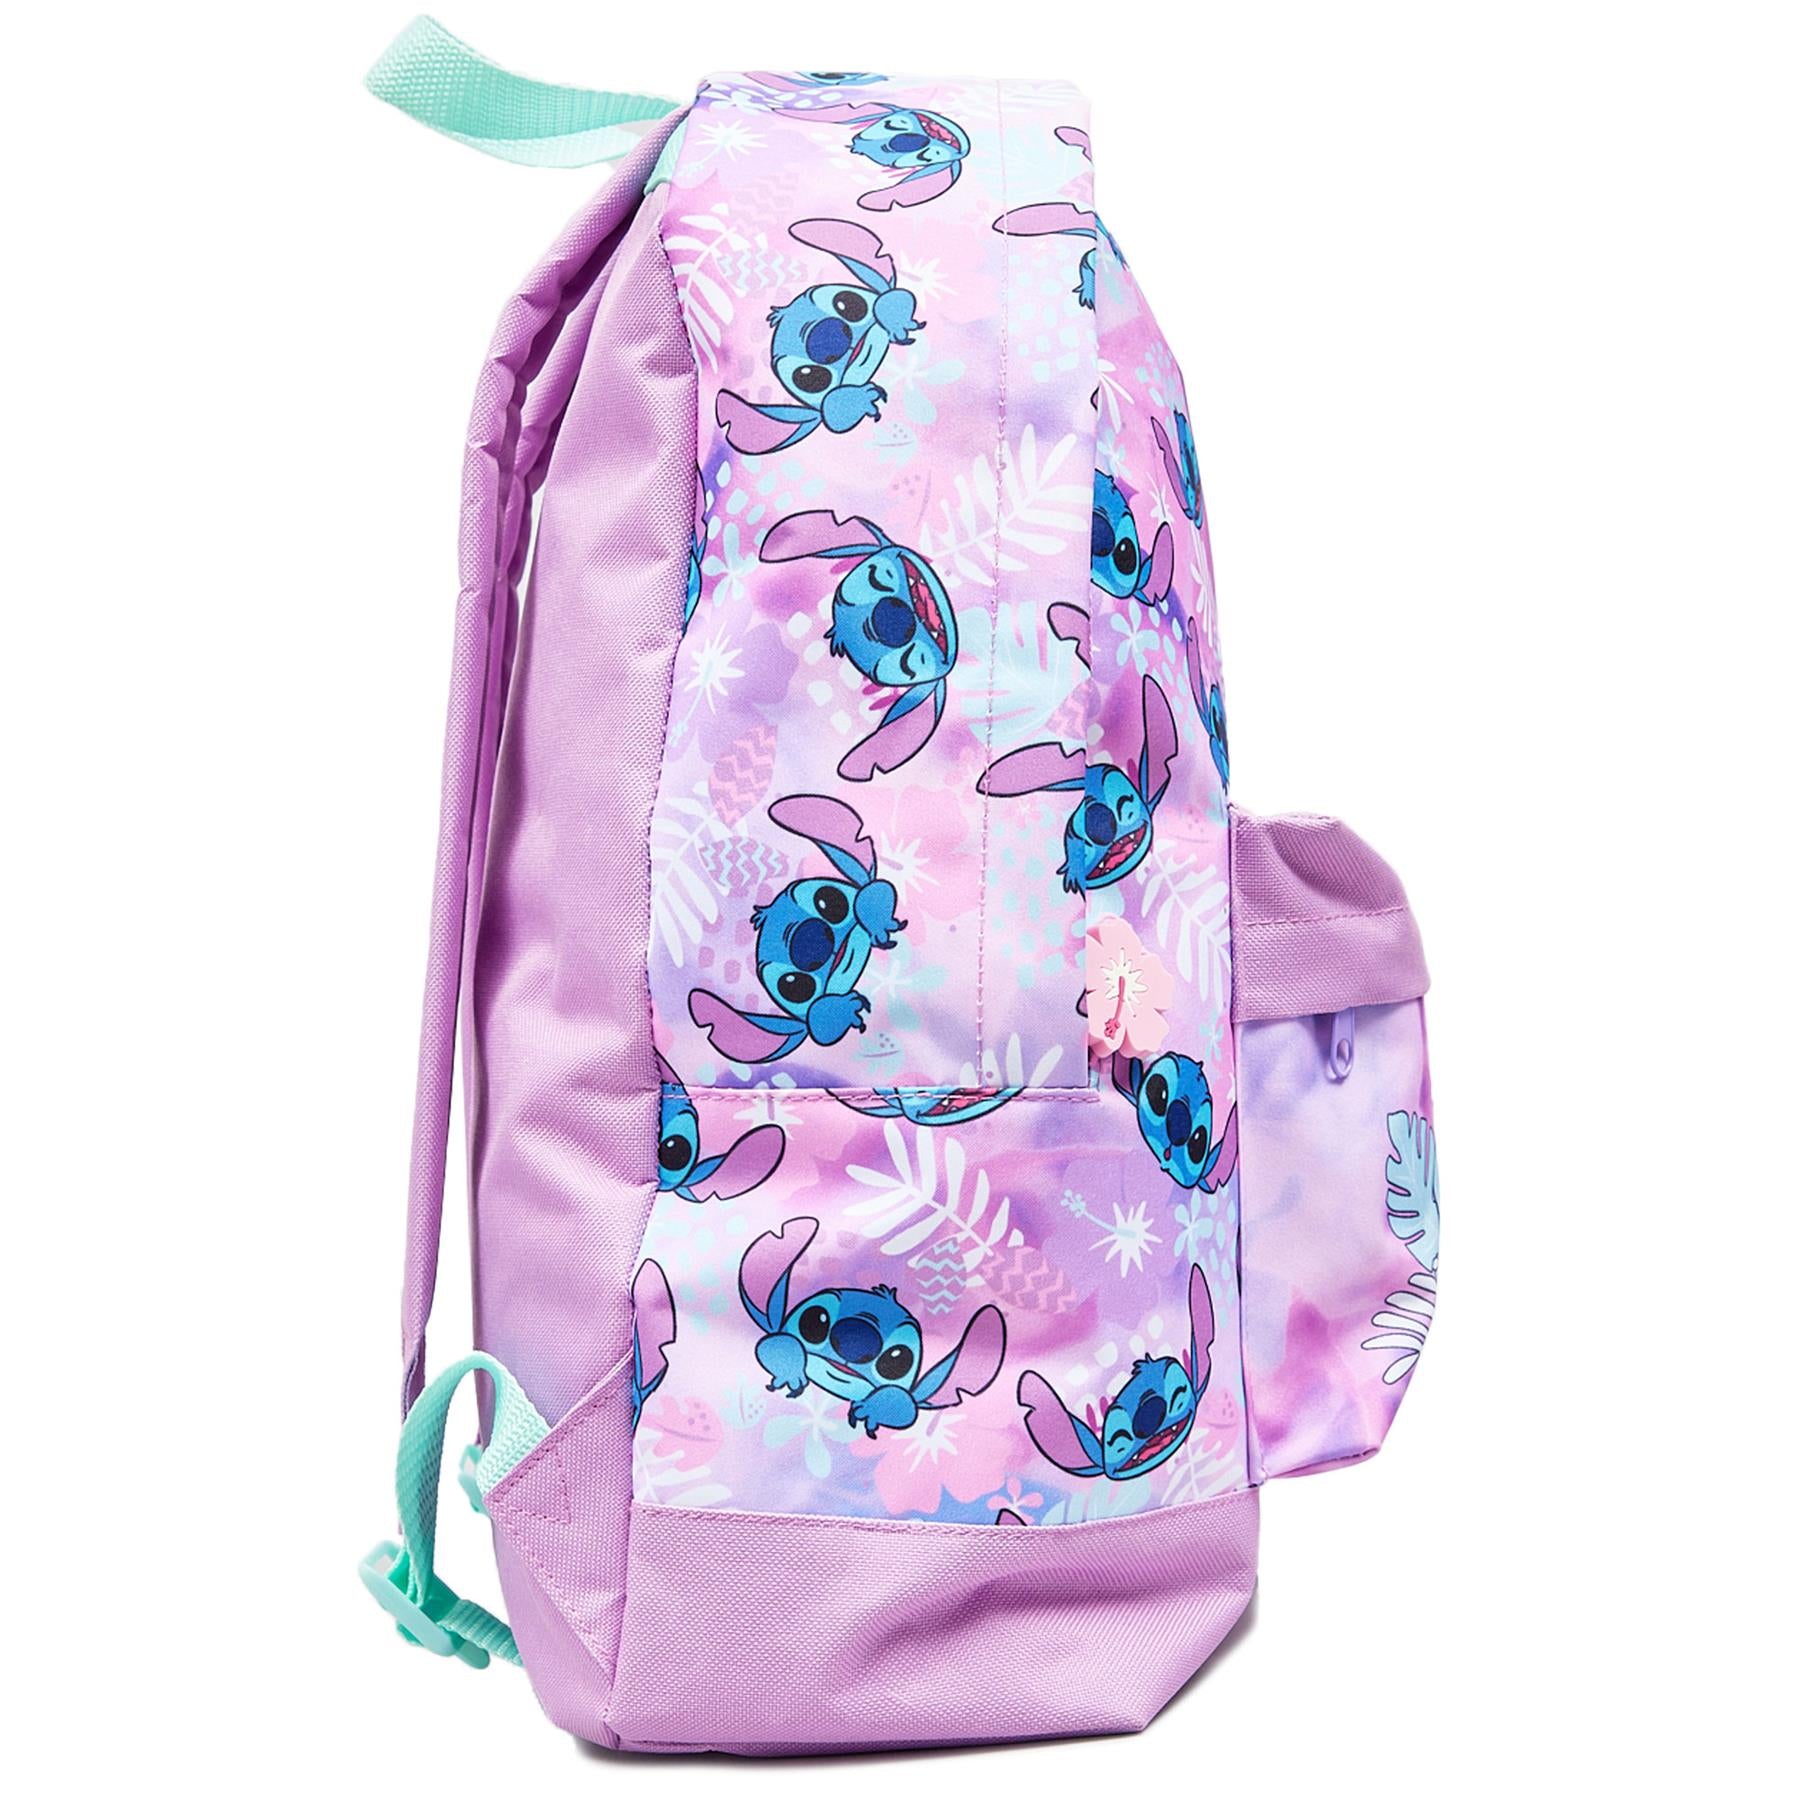 Kids Officially Licensed Disney Stitch Roxy Backpack Character School Travel Bag